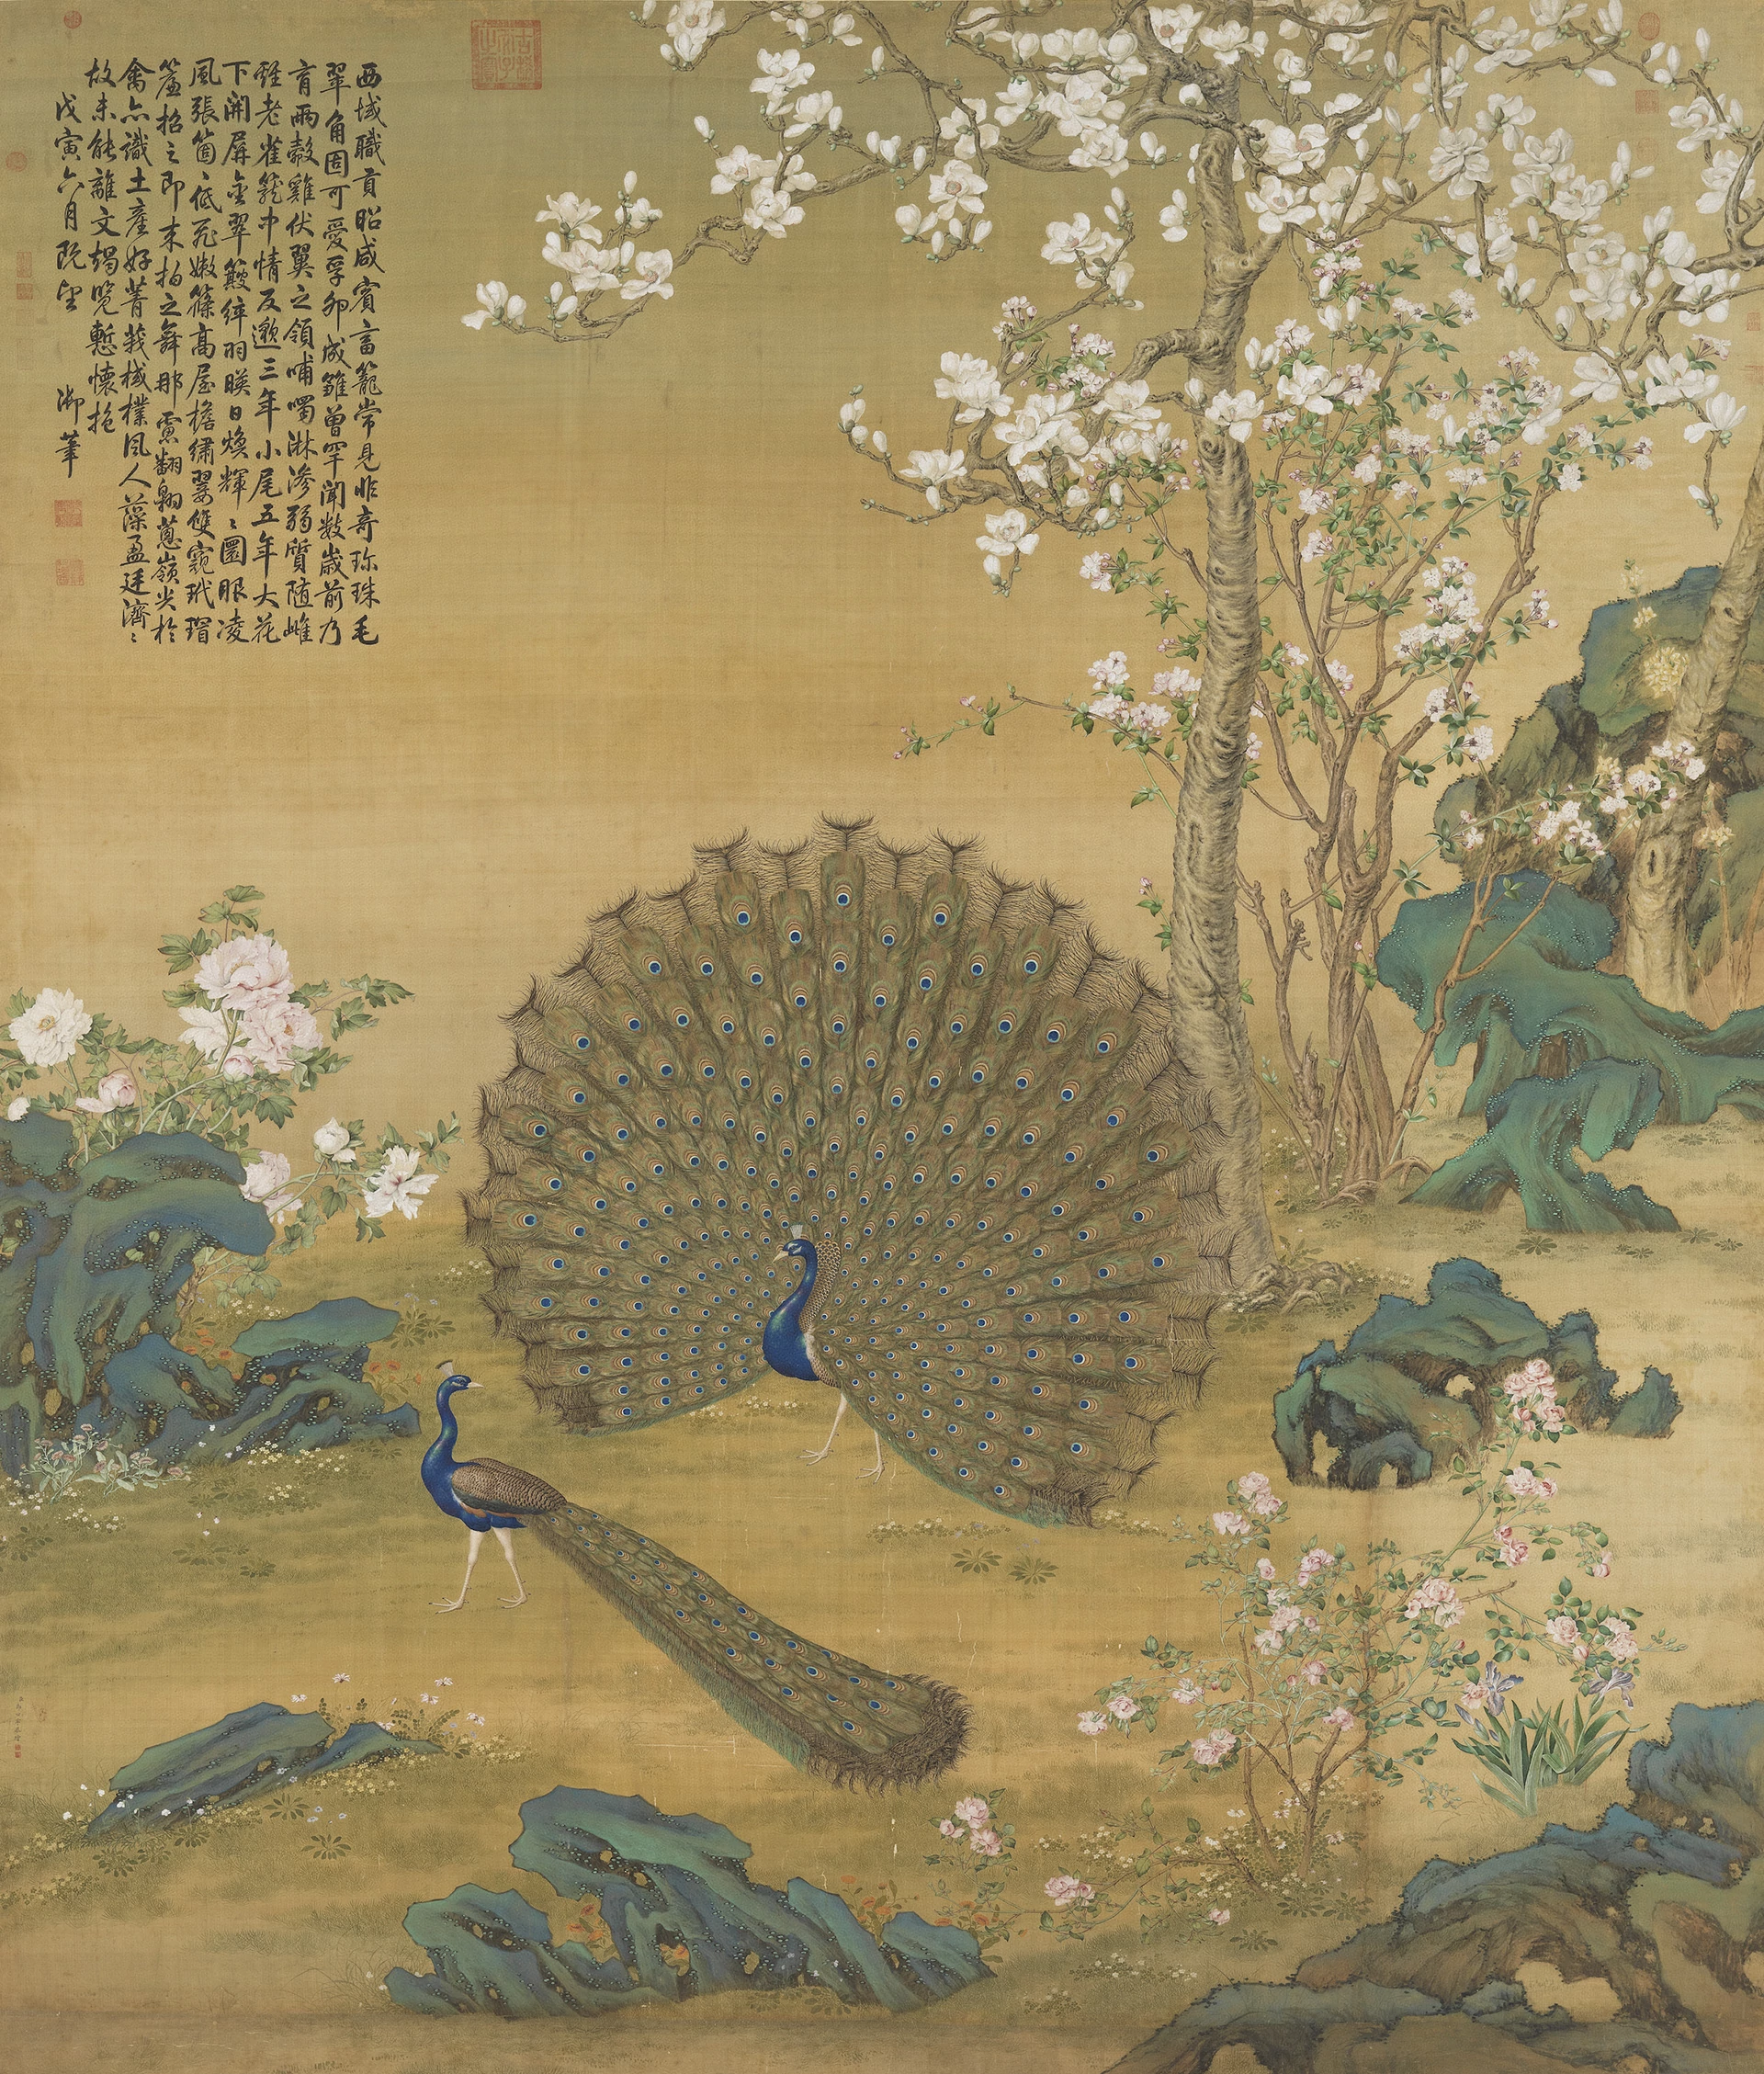 Peacock Spreading Its Tail Feathers, Giuseppe Castiglione (郎世寧)